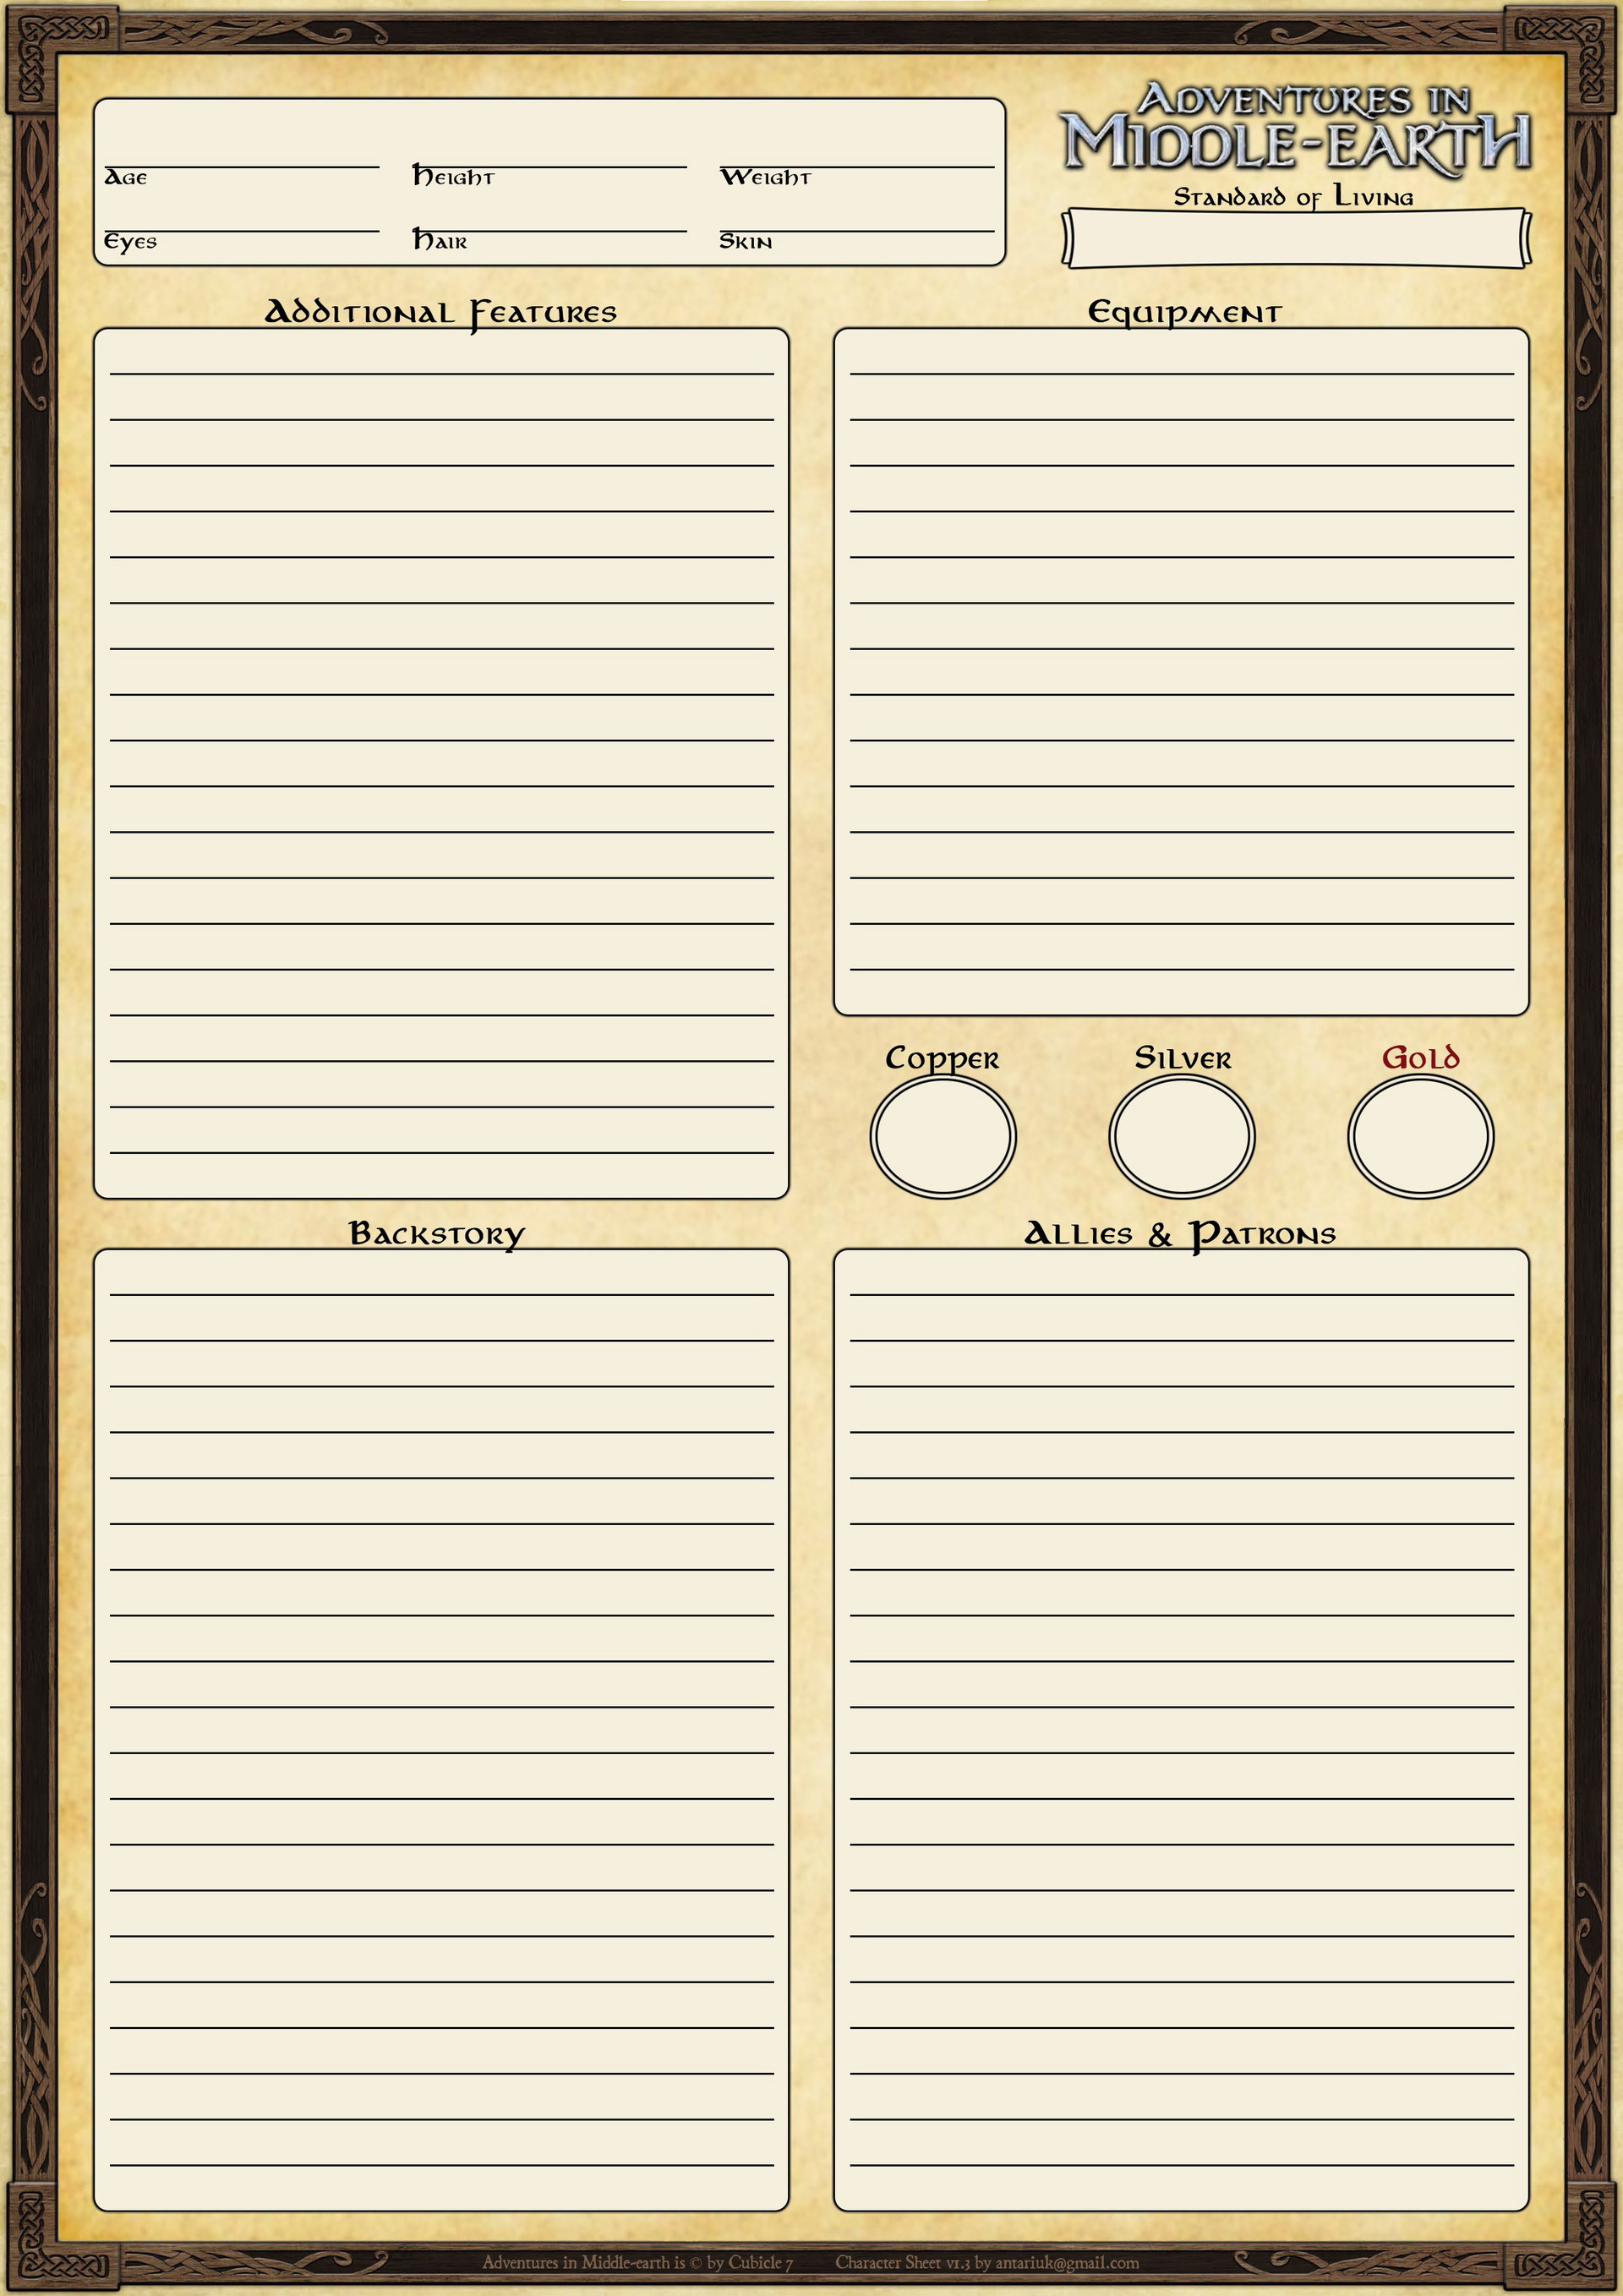 Adventures In Middle Earth Character Sheet Form Fillable - Printable ...